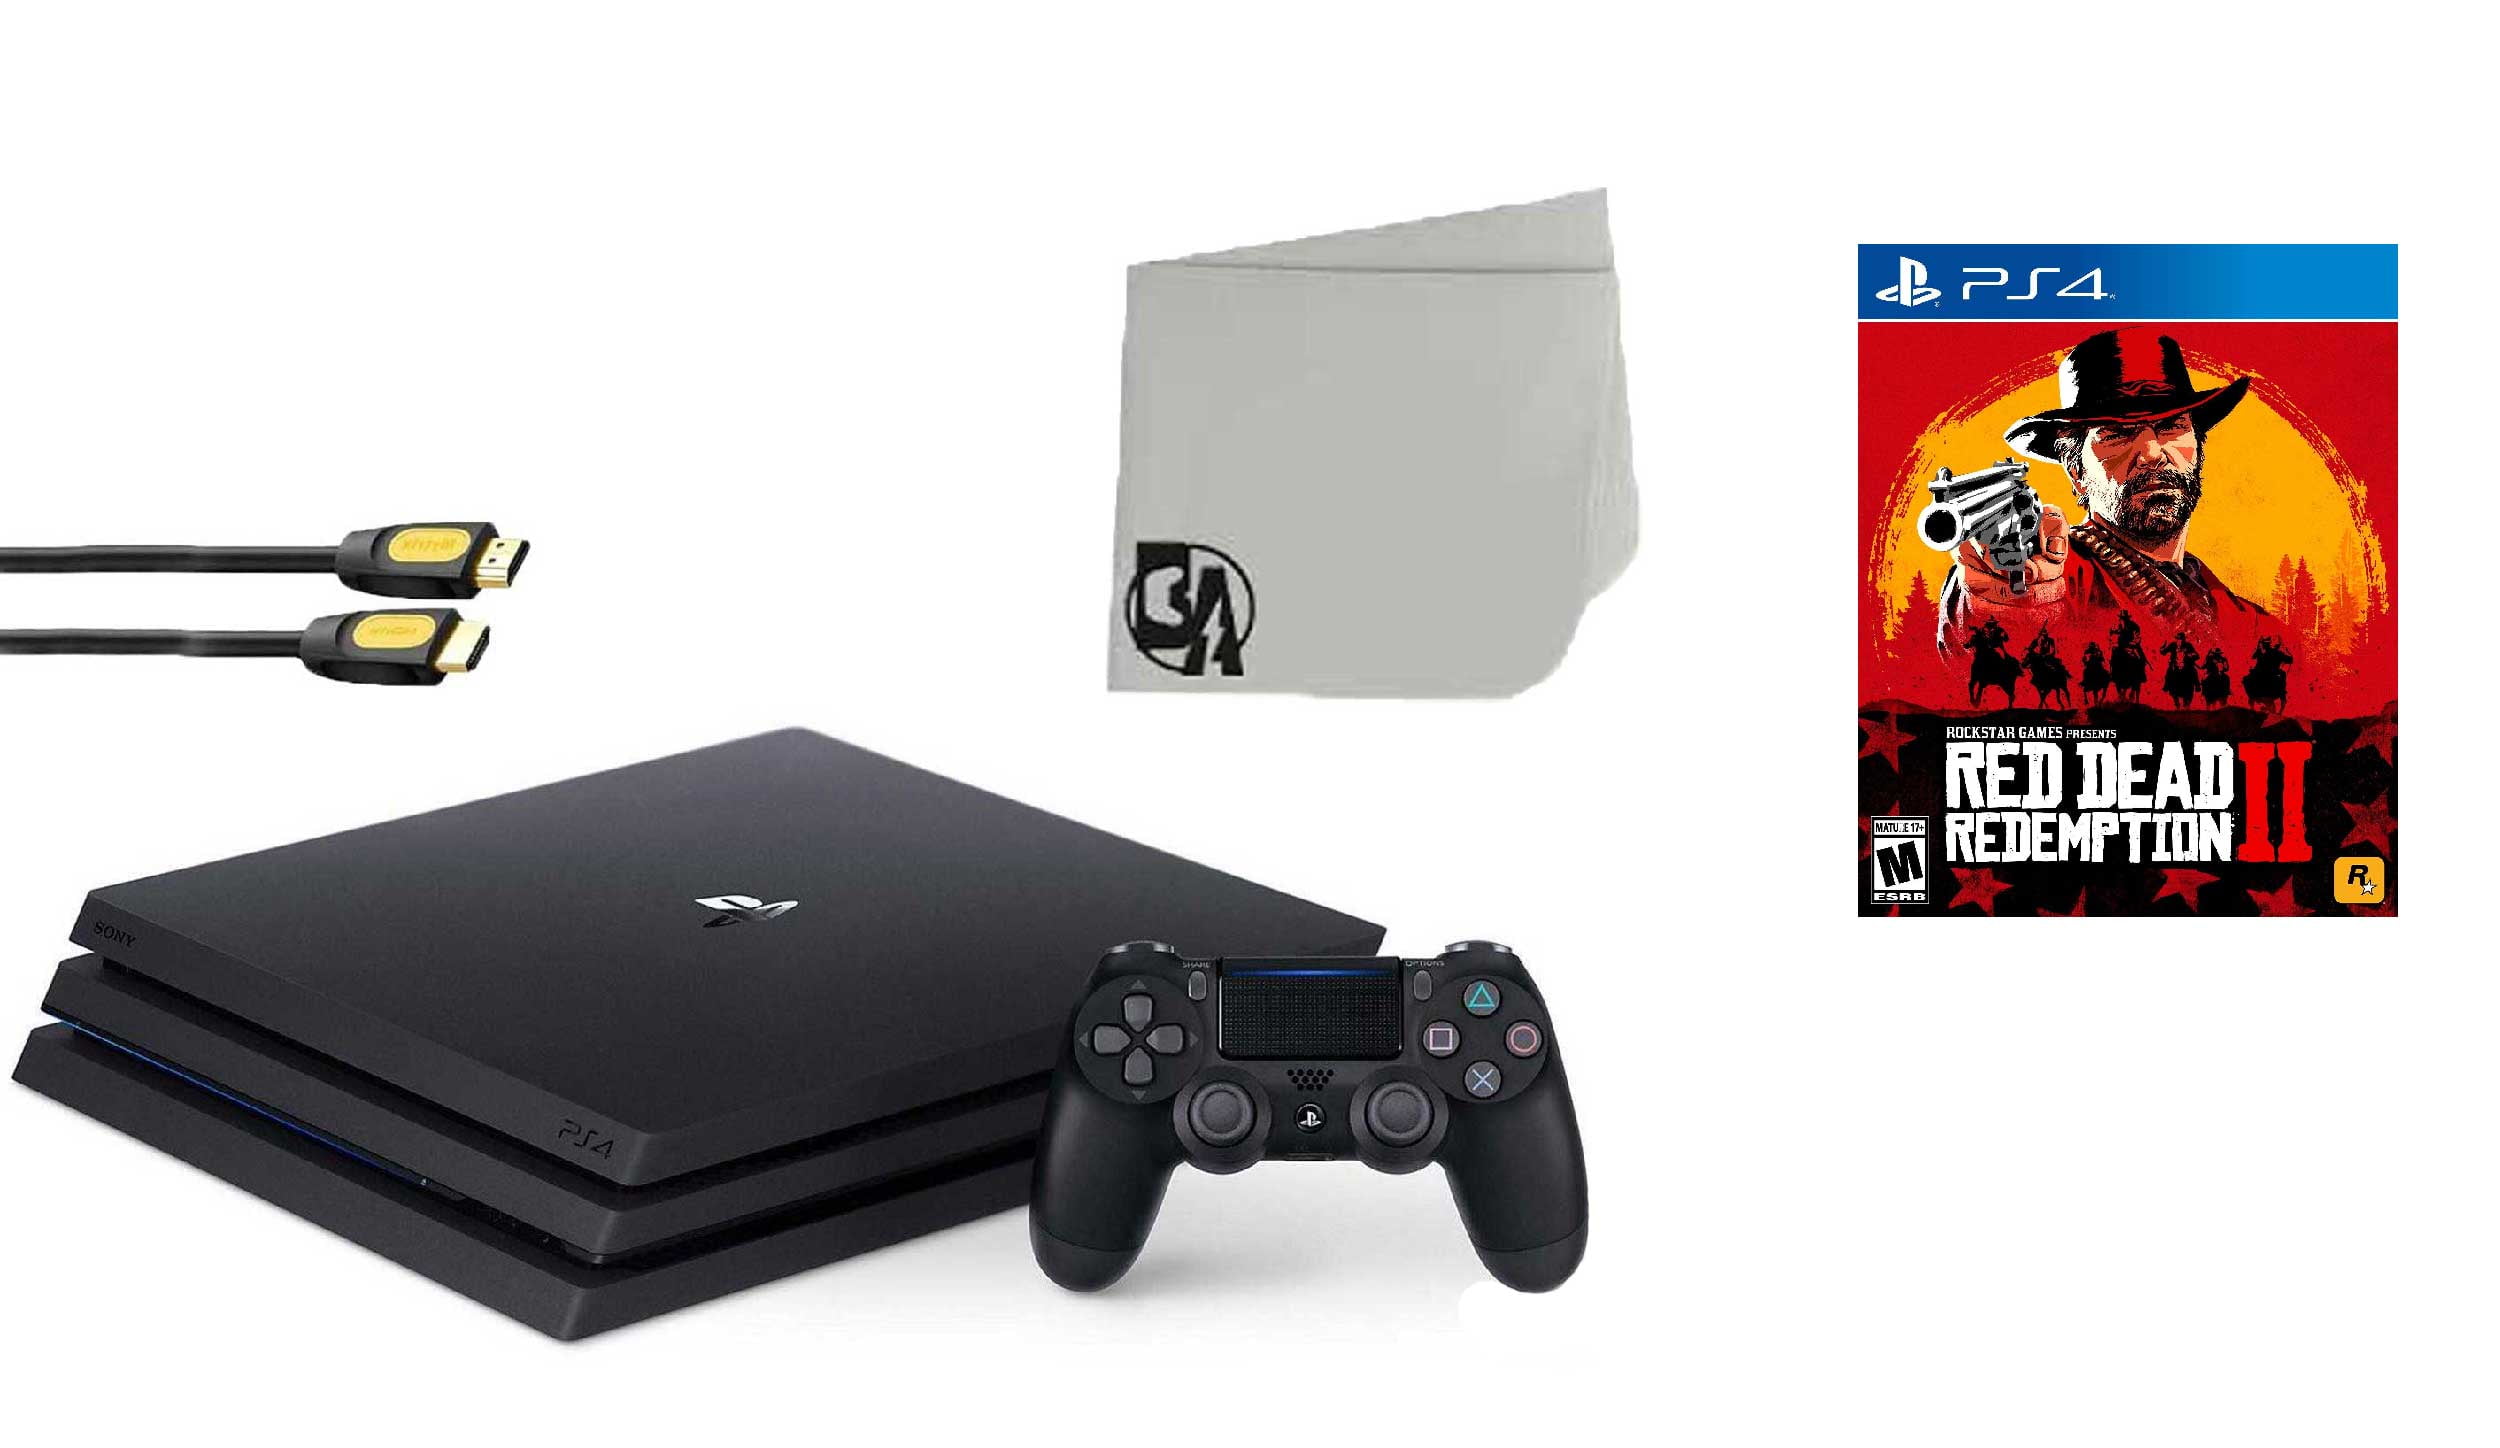 tyve pustes op korrelat Sony PlayStation 4 PRO 1TB Gaming Console Black with Red Dead Redemption 2  BOLT AXTION Bundle Like New - Walmart.com